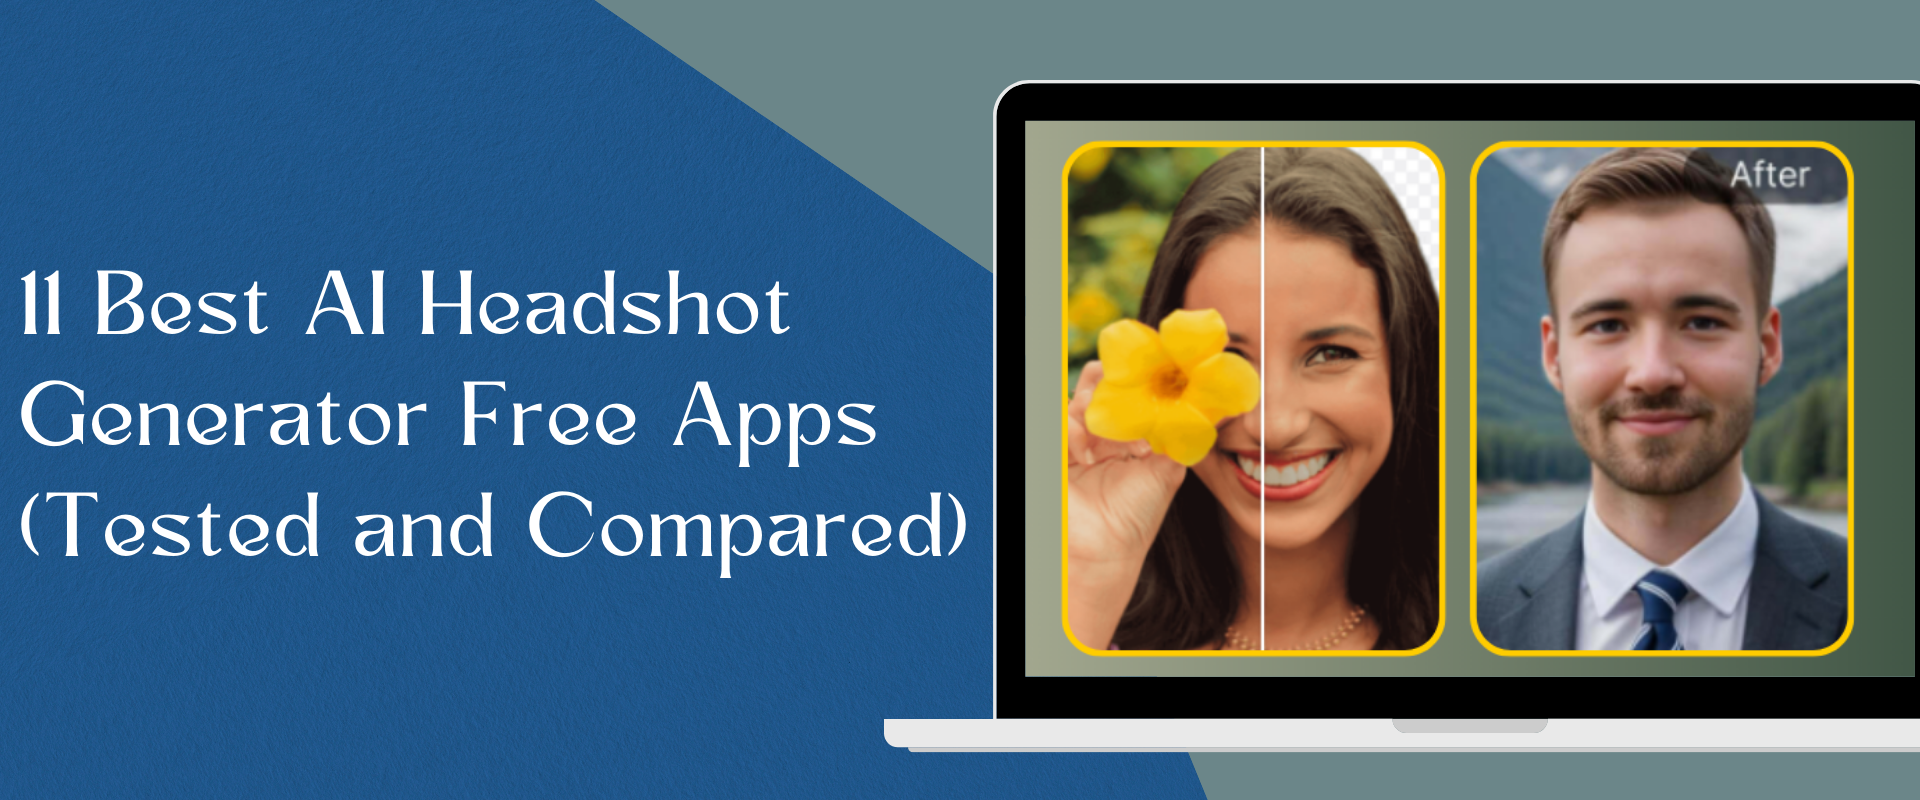 11 Best AI Headshot Generator Free Apps (Tested and Compared)